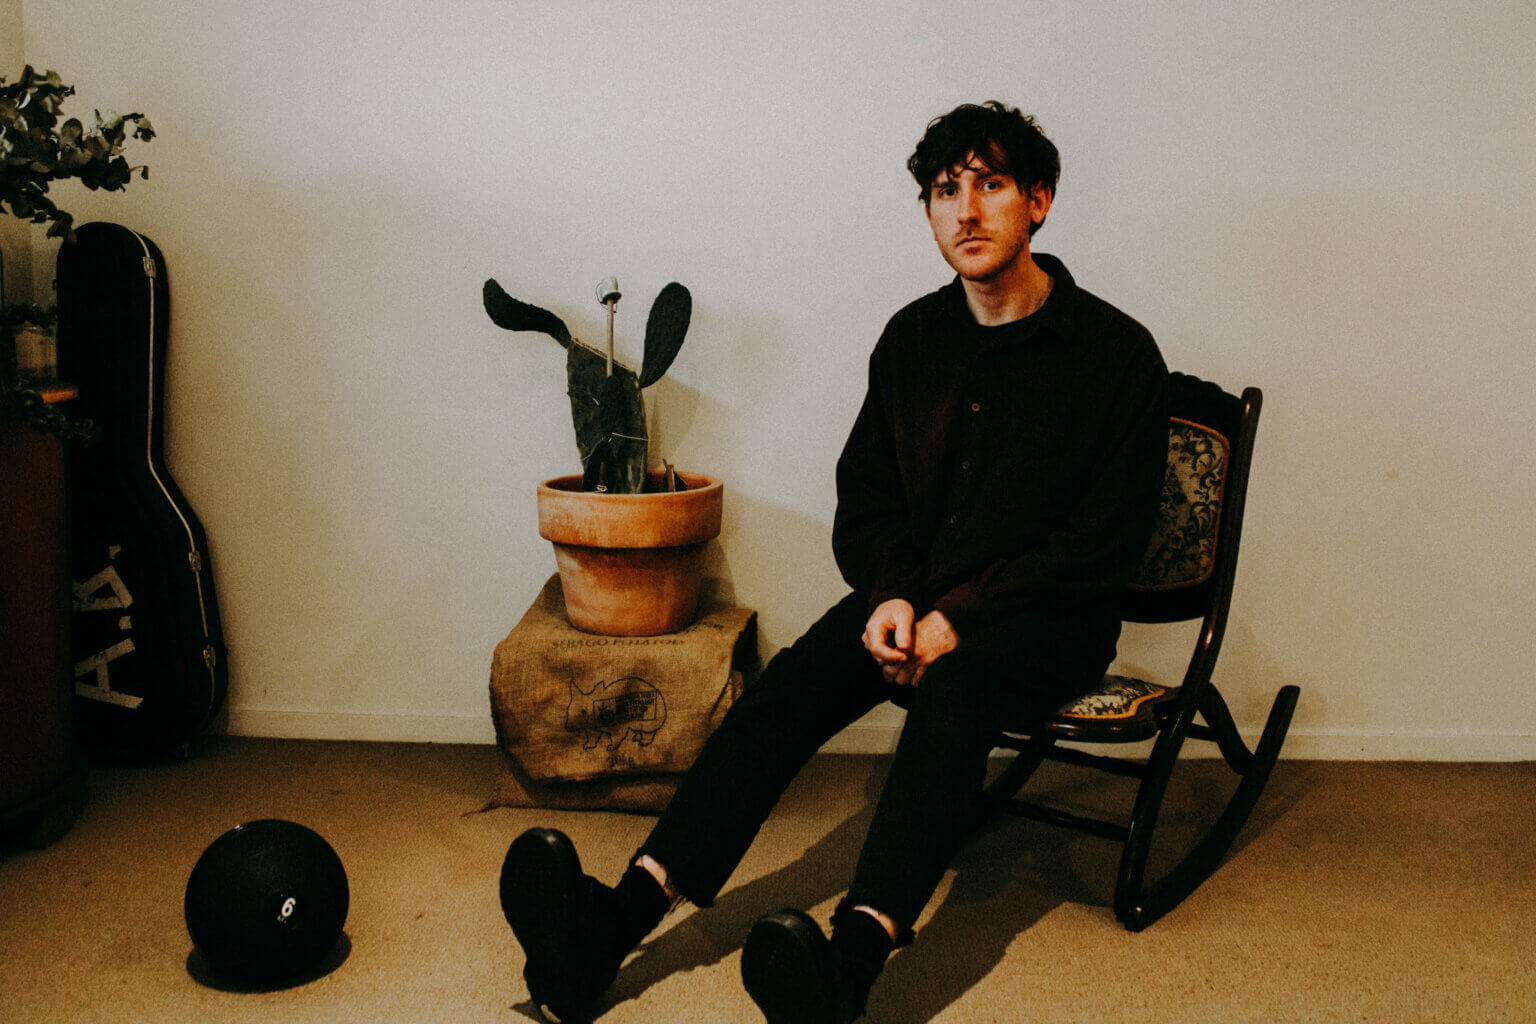 "I've Been Holding Onto You For Way Too Long" Alexander Biggs is Northern Transmissions Song of the Day